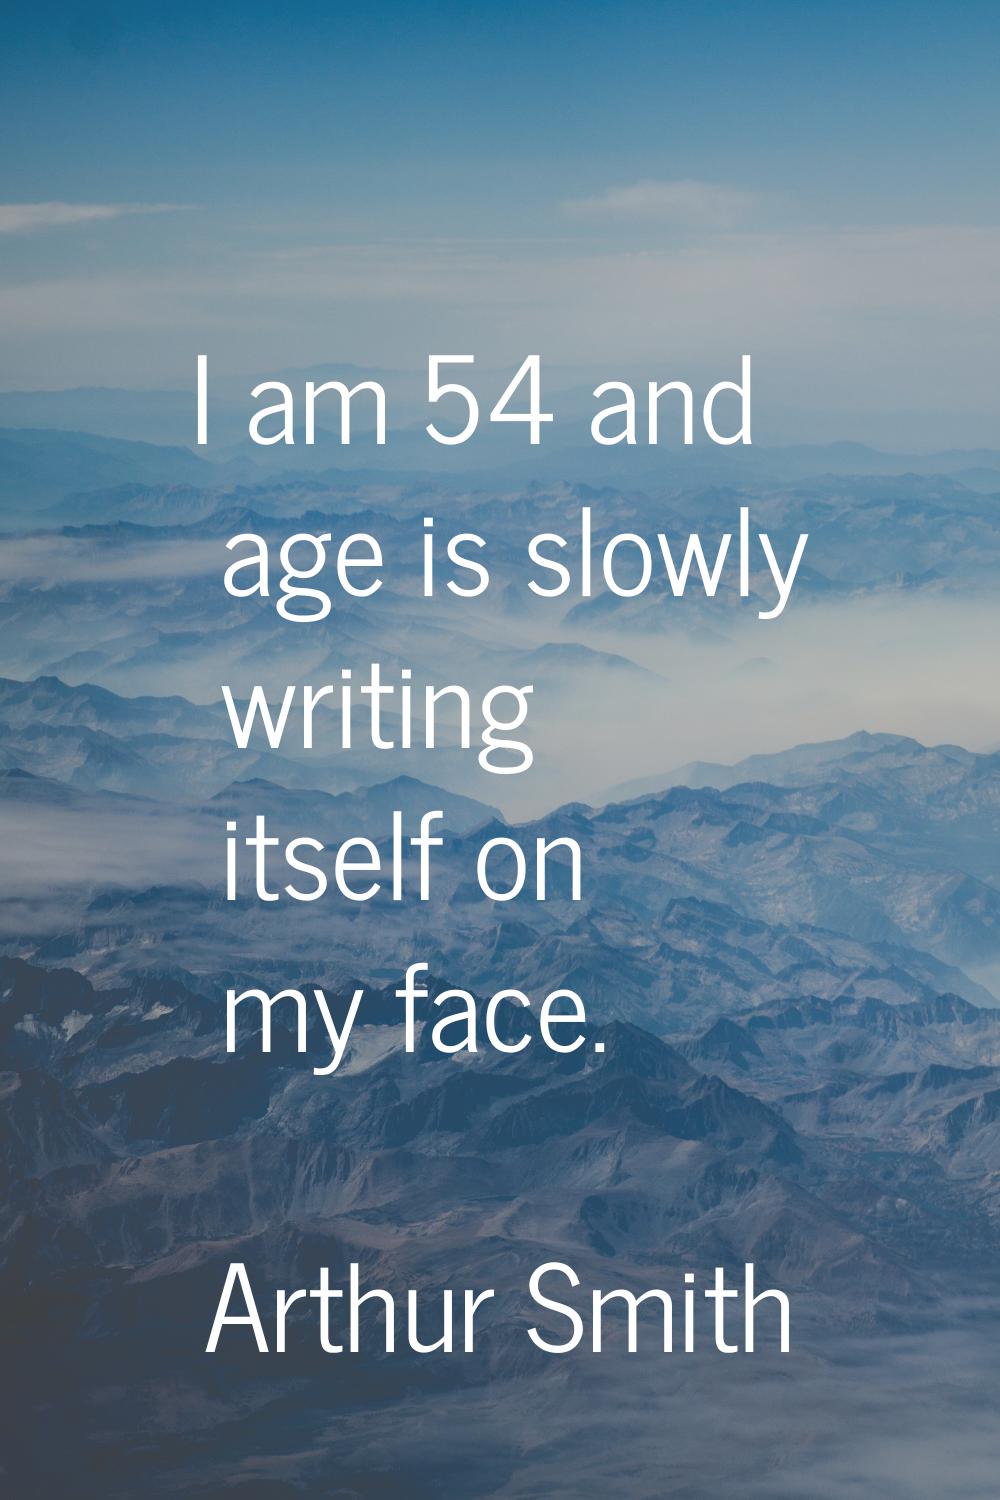 I am 54 and age is slowly writing itself on my face.